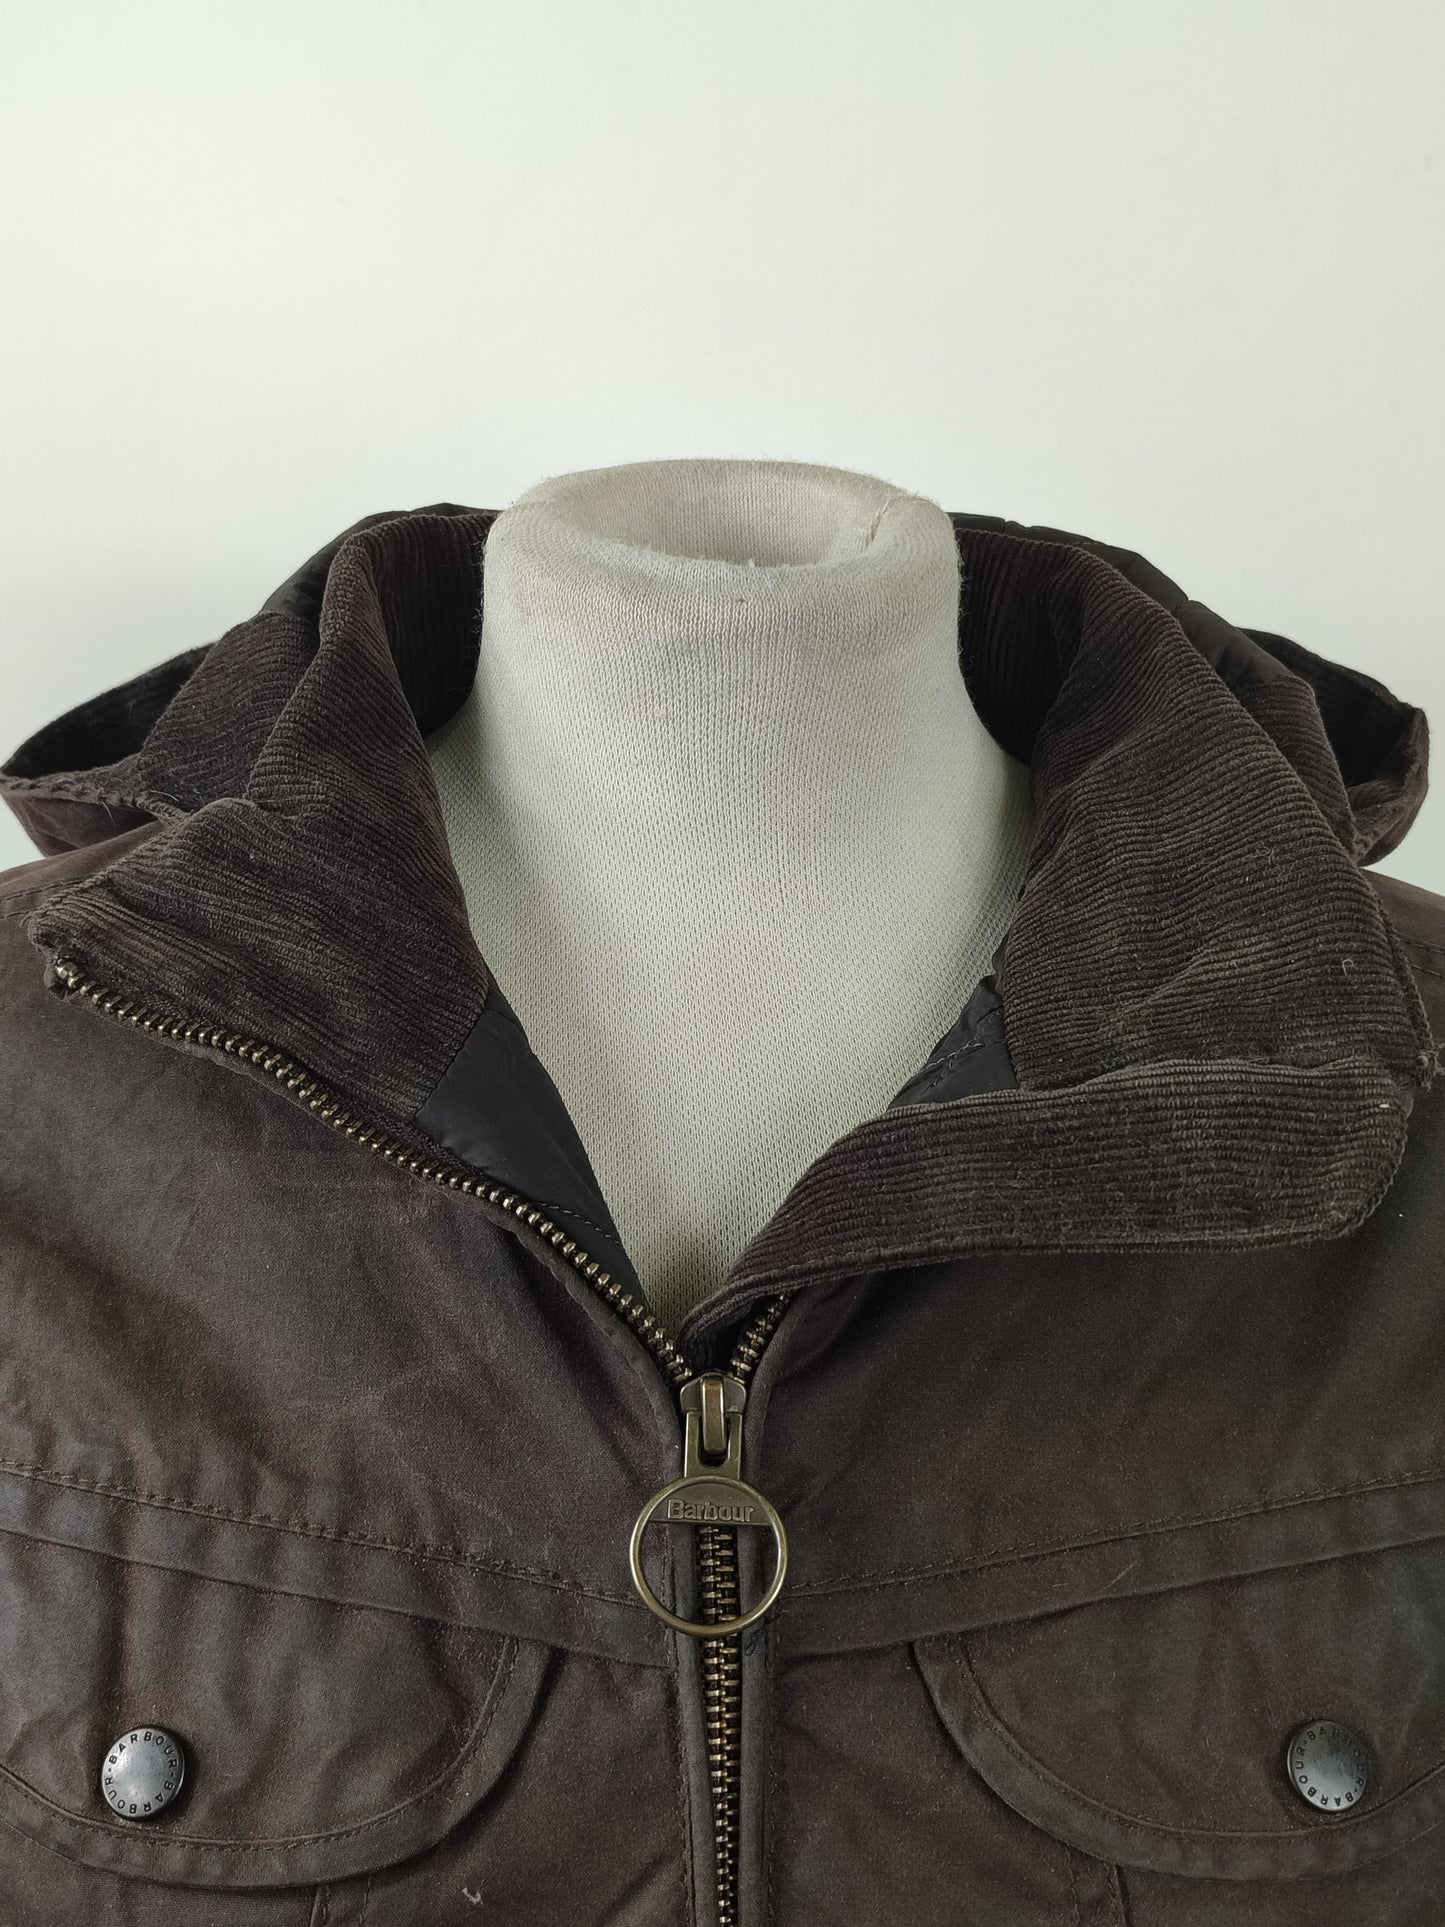 Giacca Barbour da donna marrone XSmall tg.38-Lady Cameron Brown waxed Jacket uk8